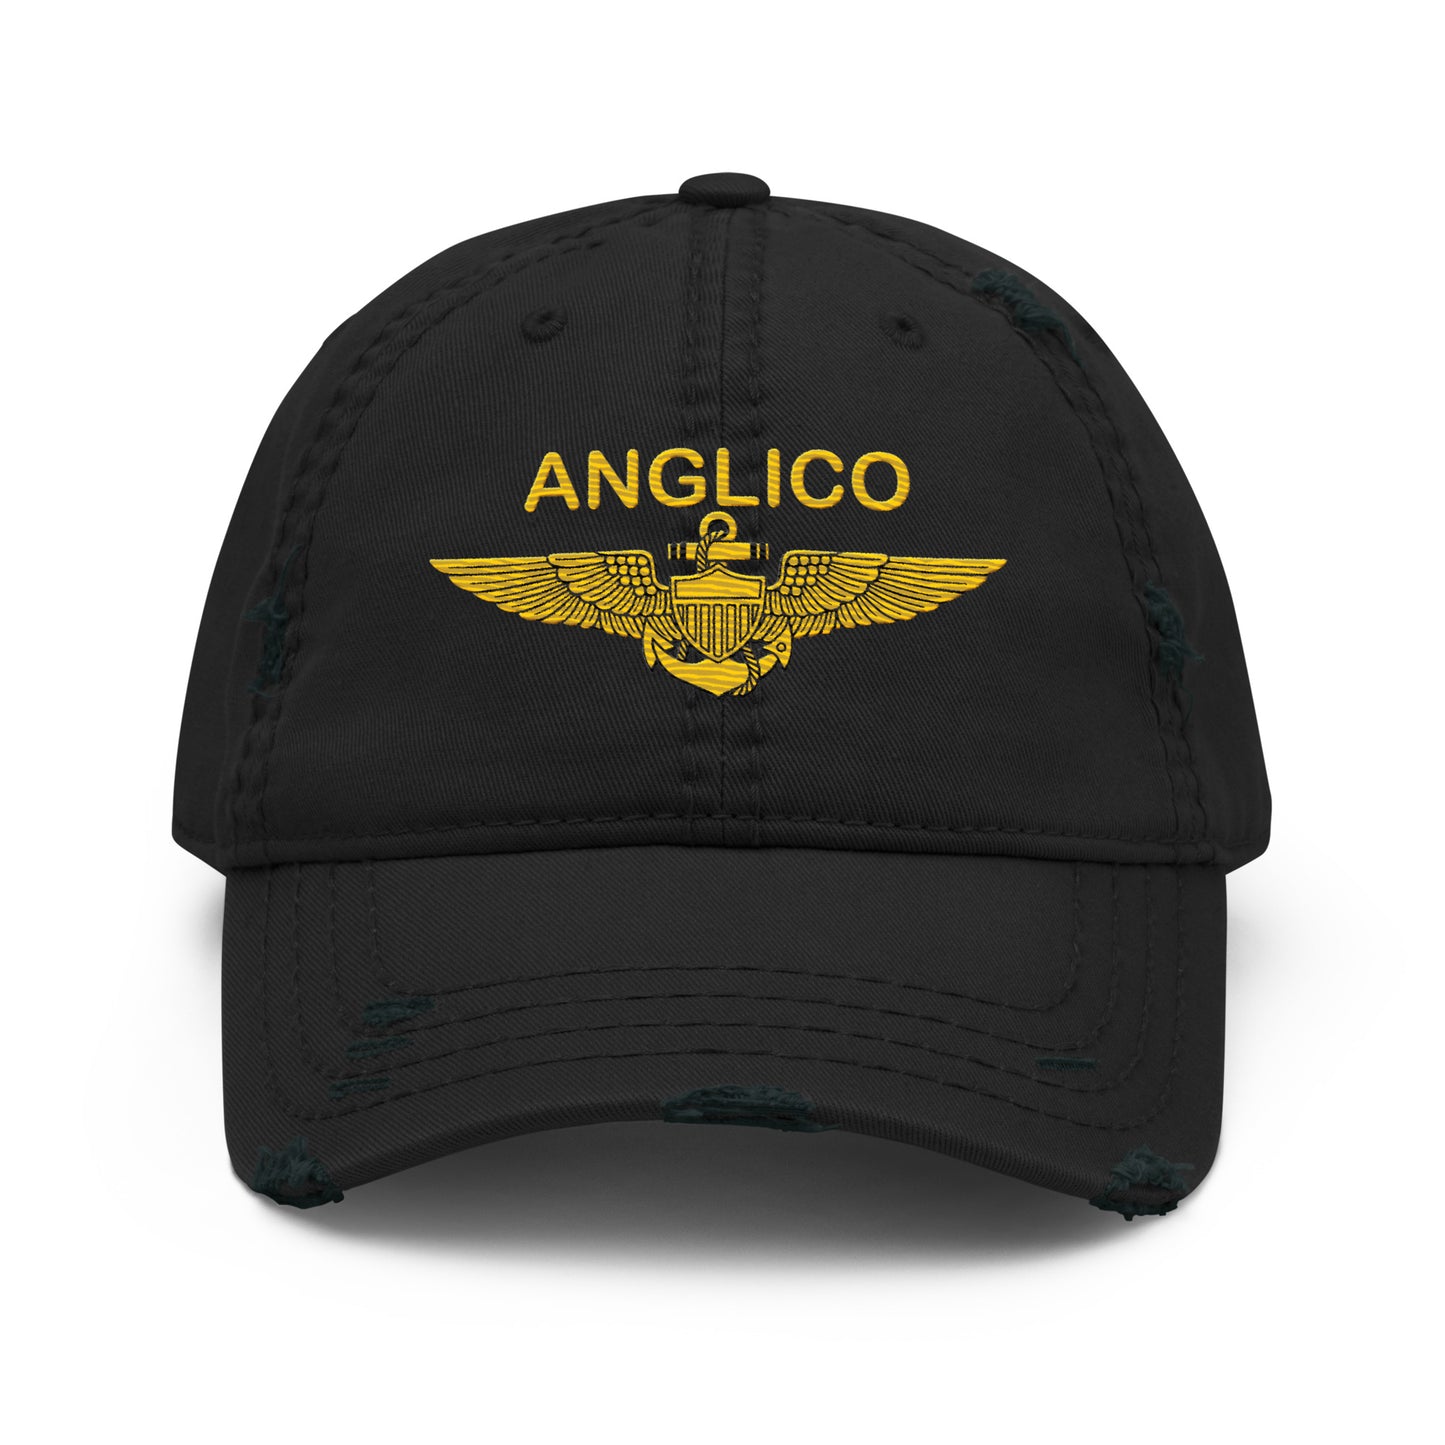 ANGLICO Naval Aviator Distressed Hat